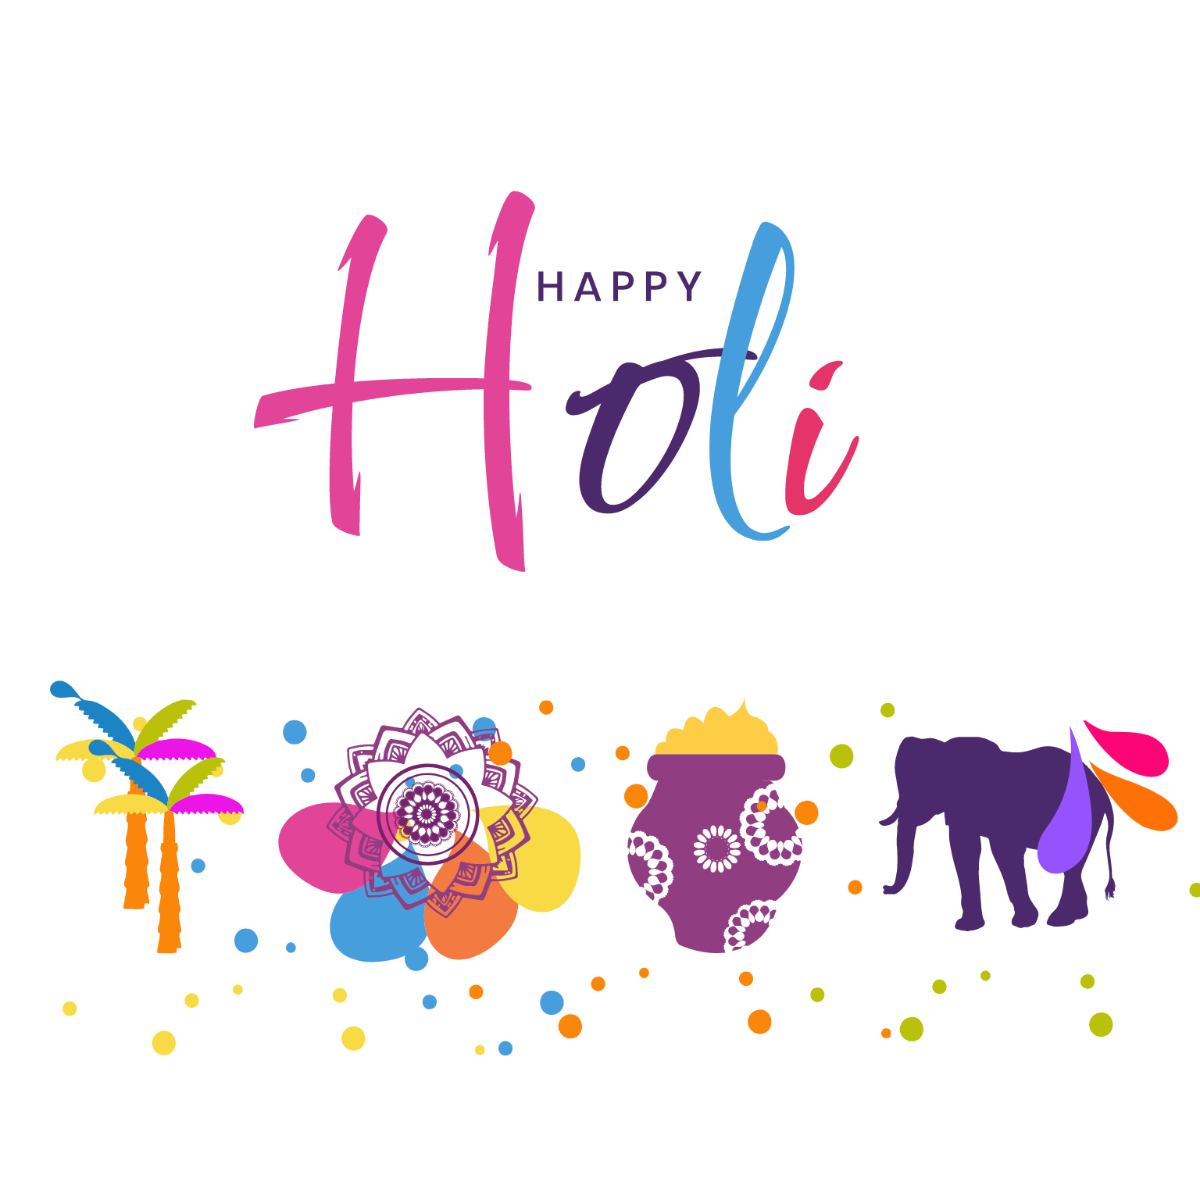 Free Holi Poster Vector Template